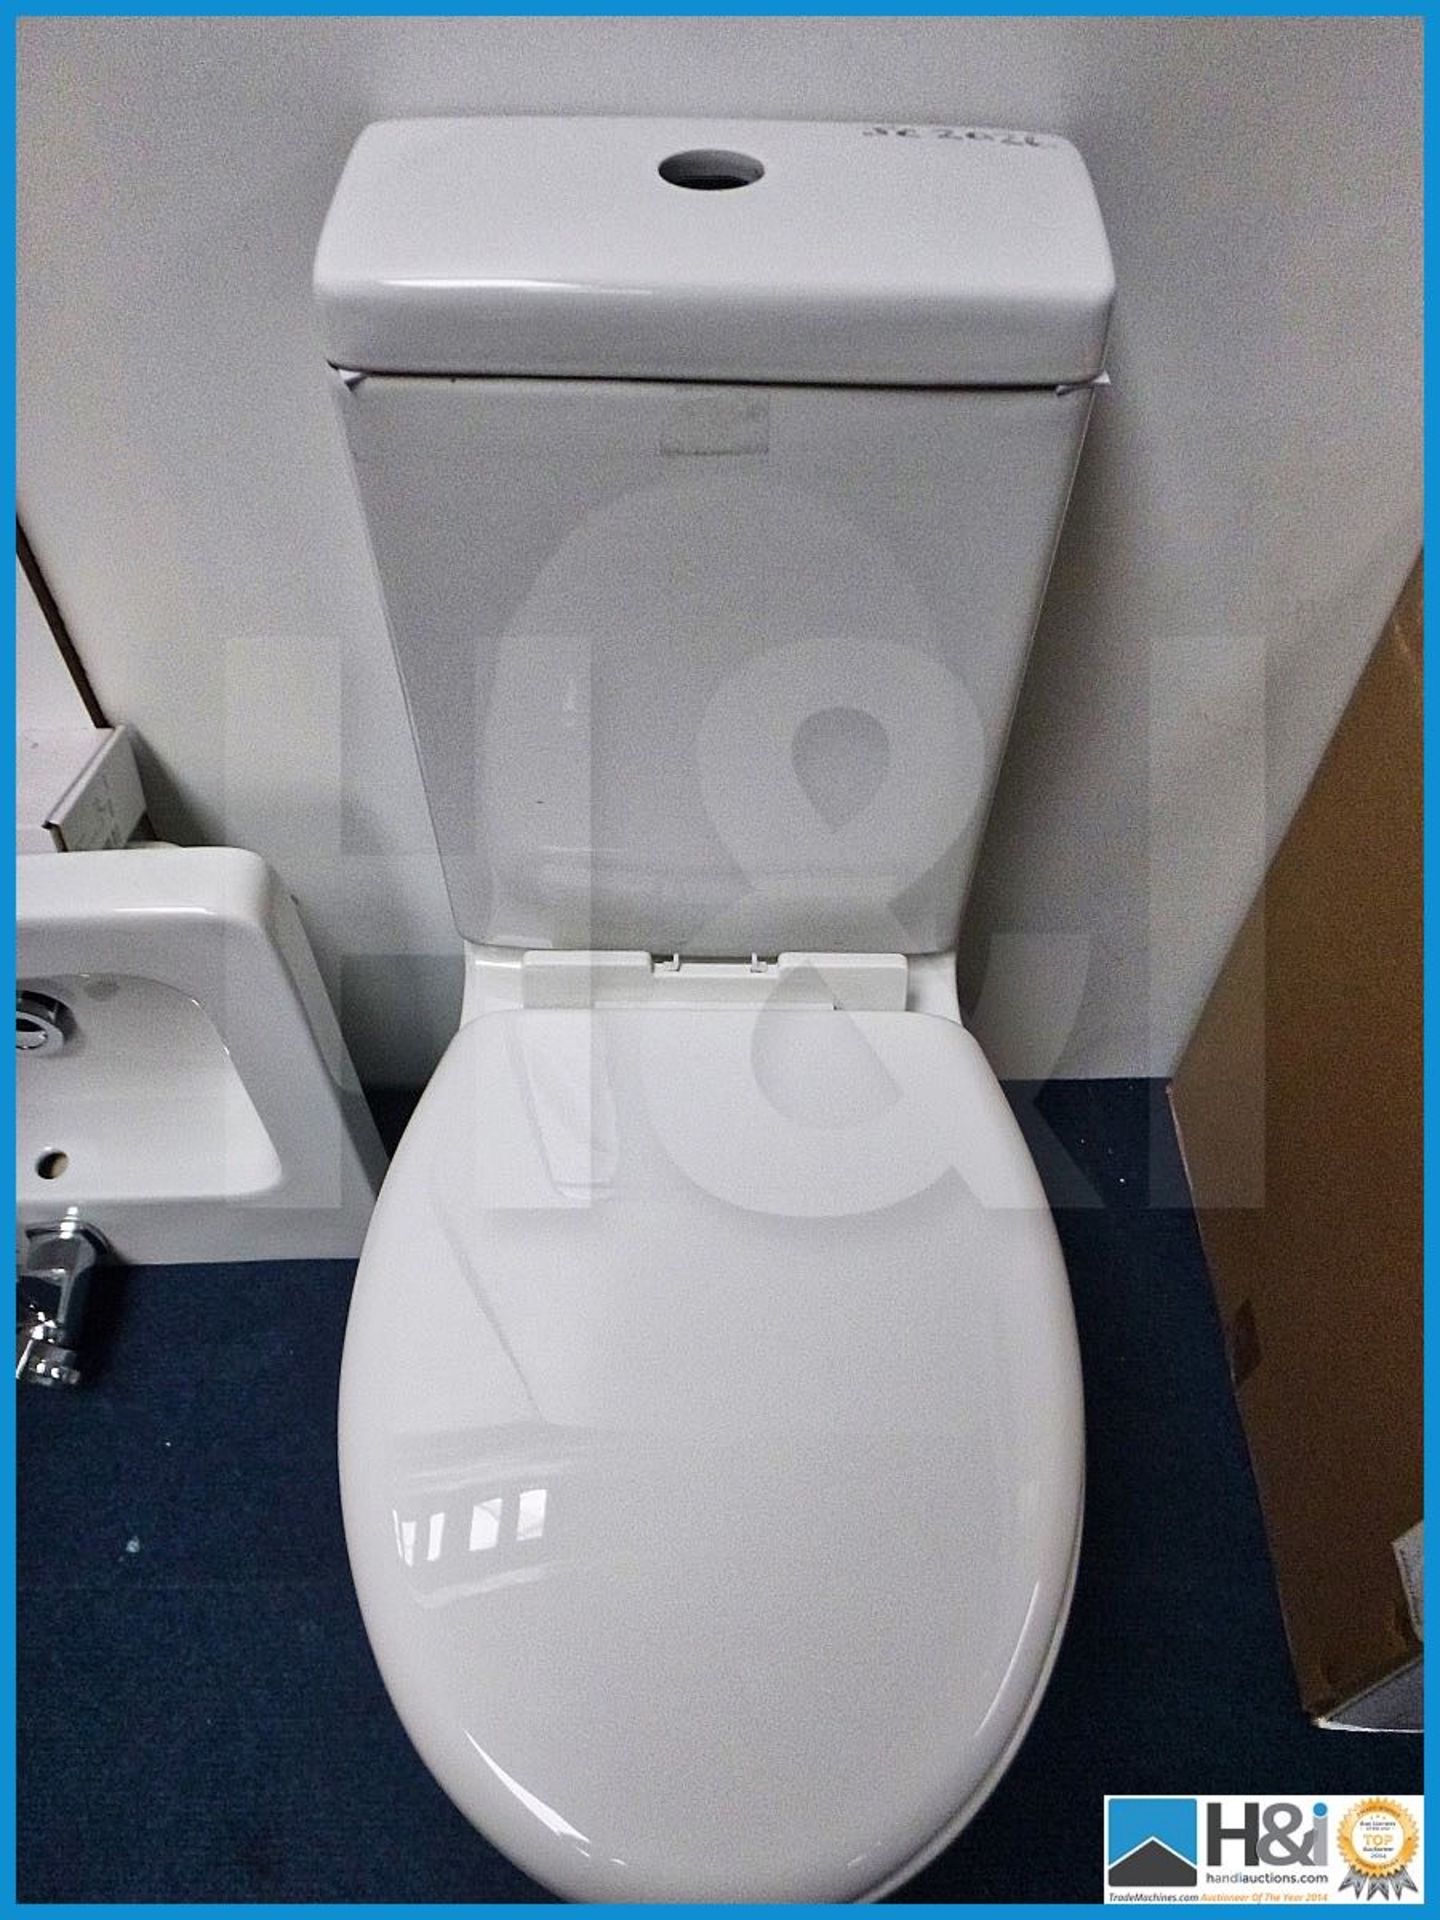 Designer full fascia close couple WC complete with detatchable soft close seat. JC-2026. RRP 599 GBP